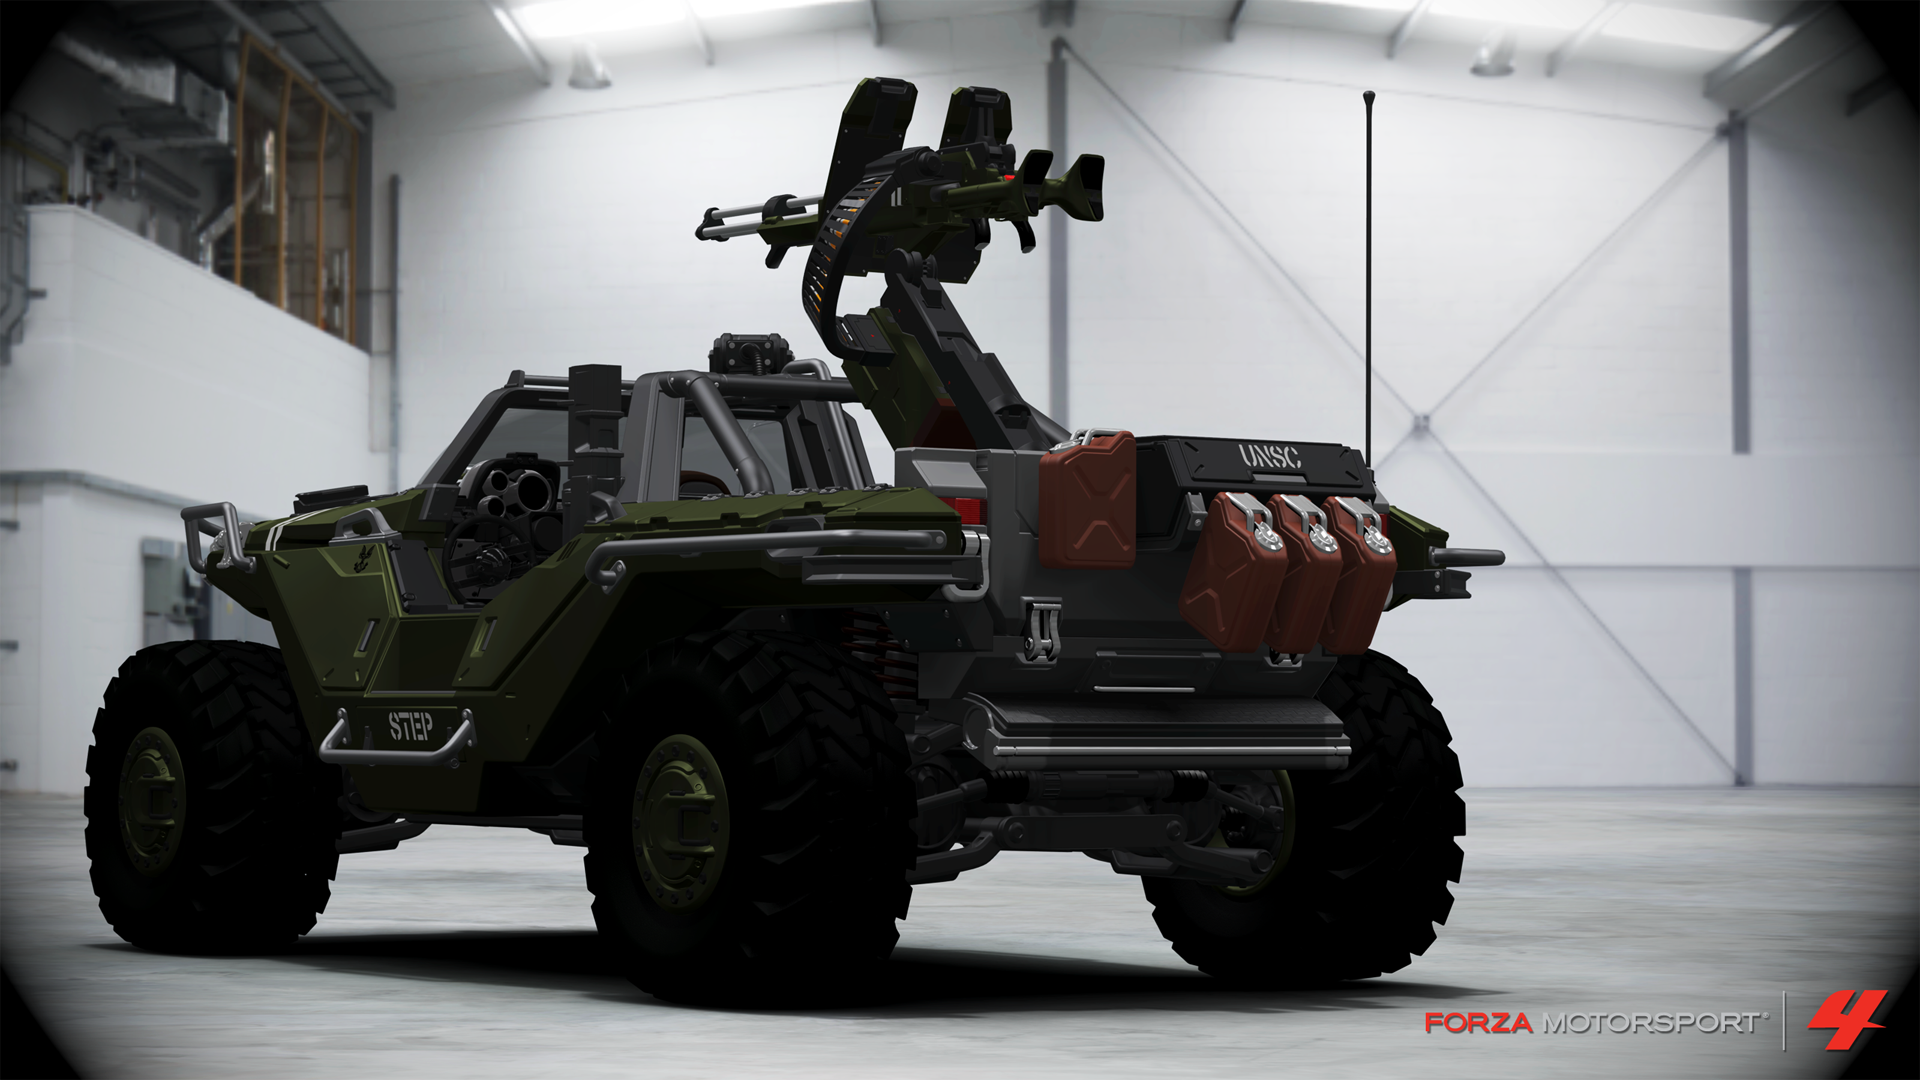 General 1920x1080 Forza Motorsport 4 car video games Halo (game) crossover vehicle Warthog UNSC Turn 10 Studios